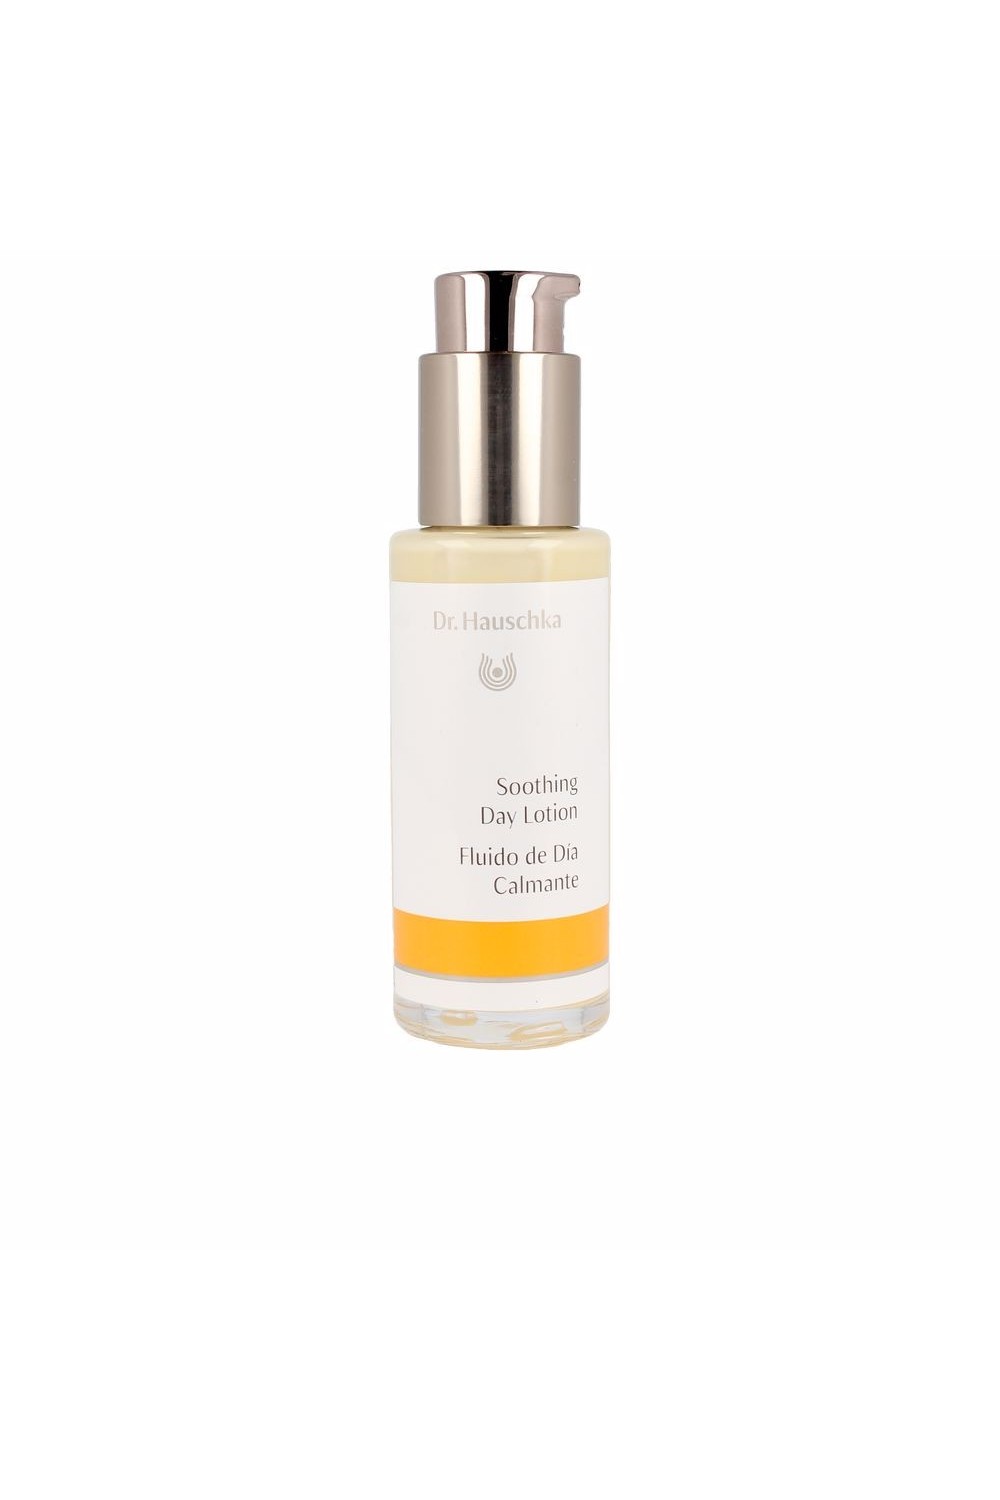 DR. HAUSCHKA - Dr. Huaschka Soothing Day Lotion 50ml